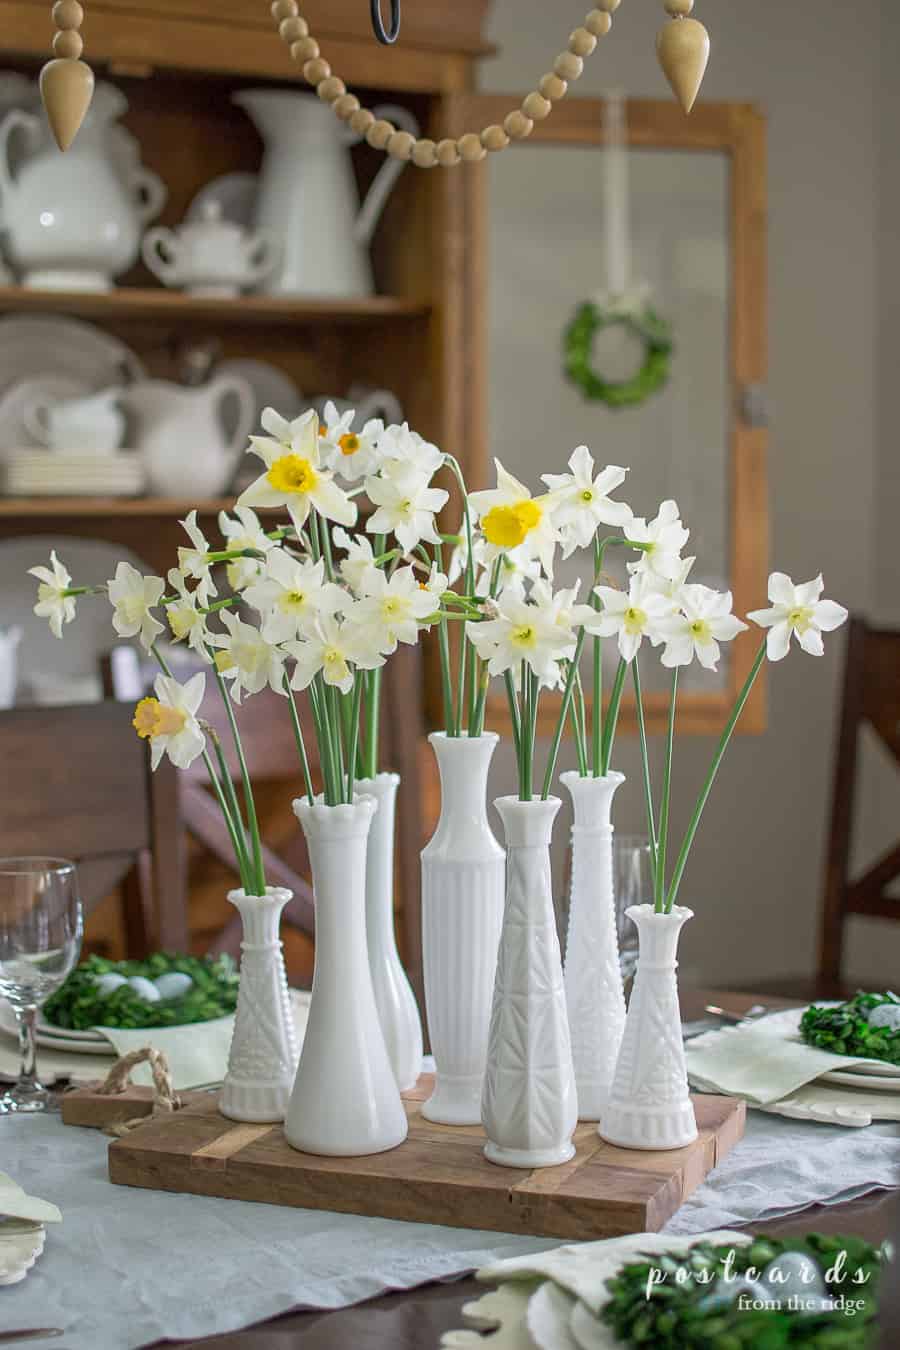 Tips for Collecting Milk Glass and How to Use It in Your Home